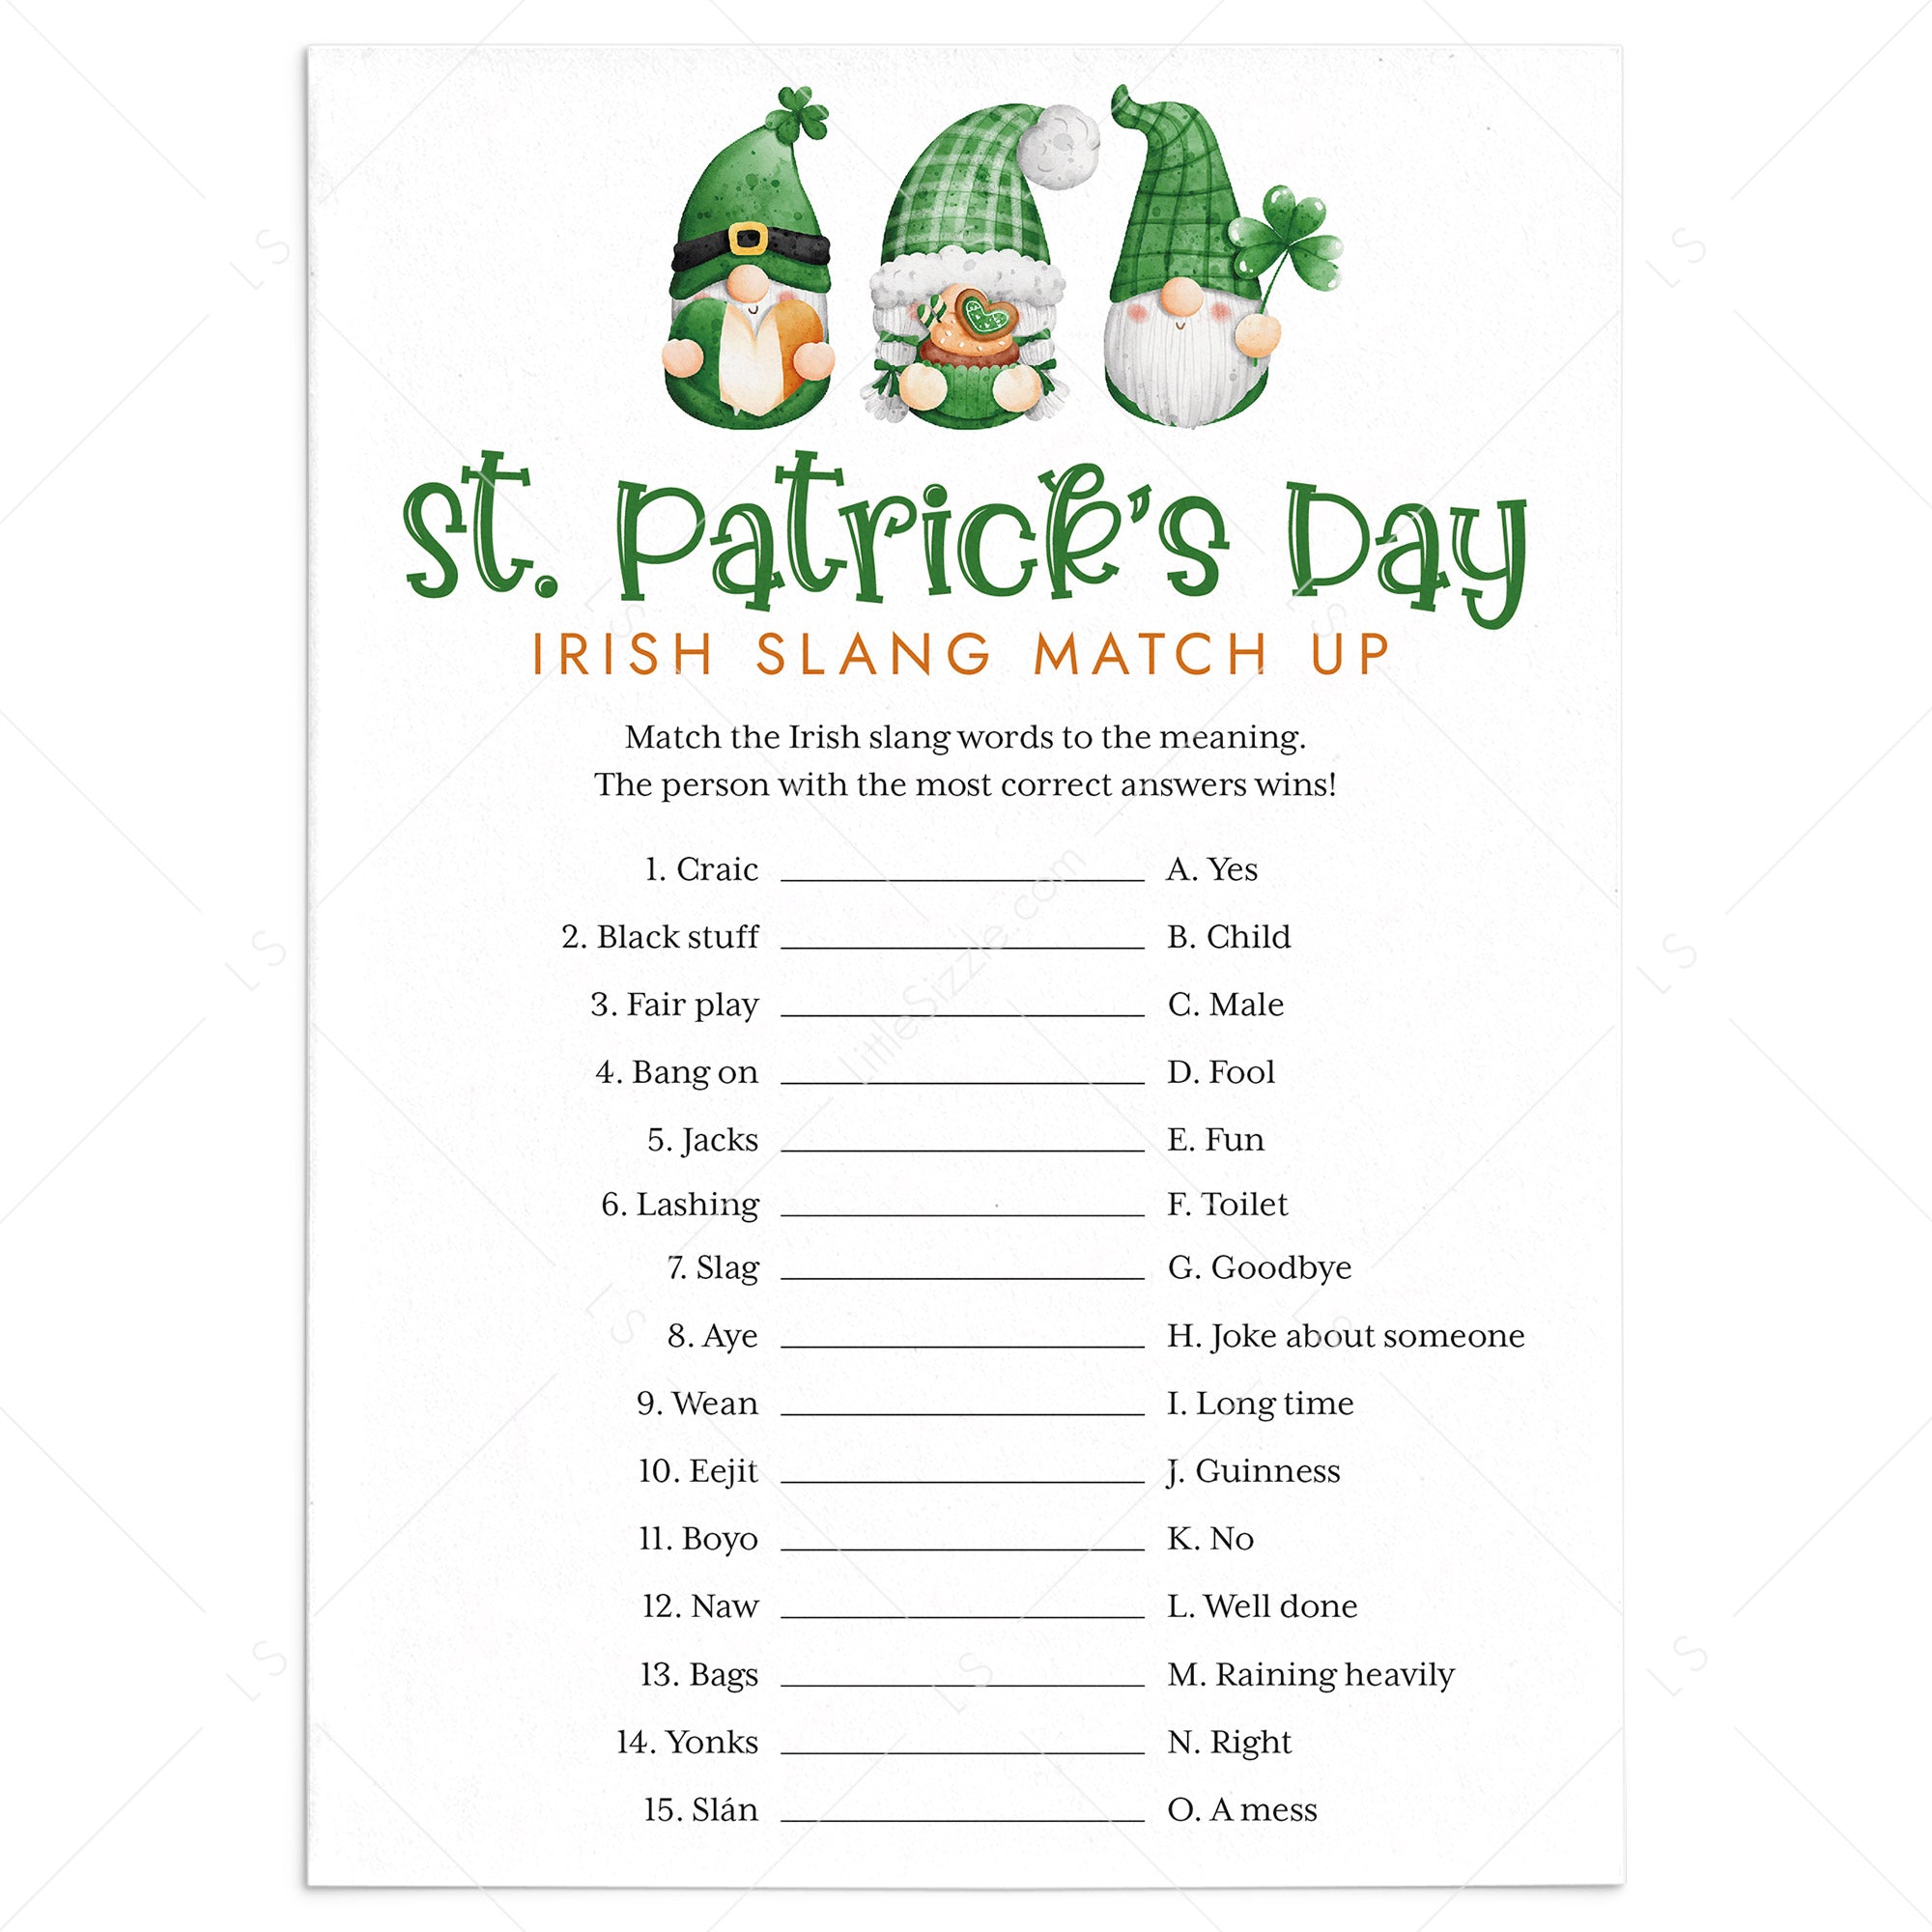 Fun St Patrick's Day Game Irish Slang Words Match Up with Answers by LittleSizzle